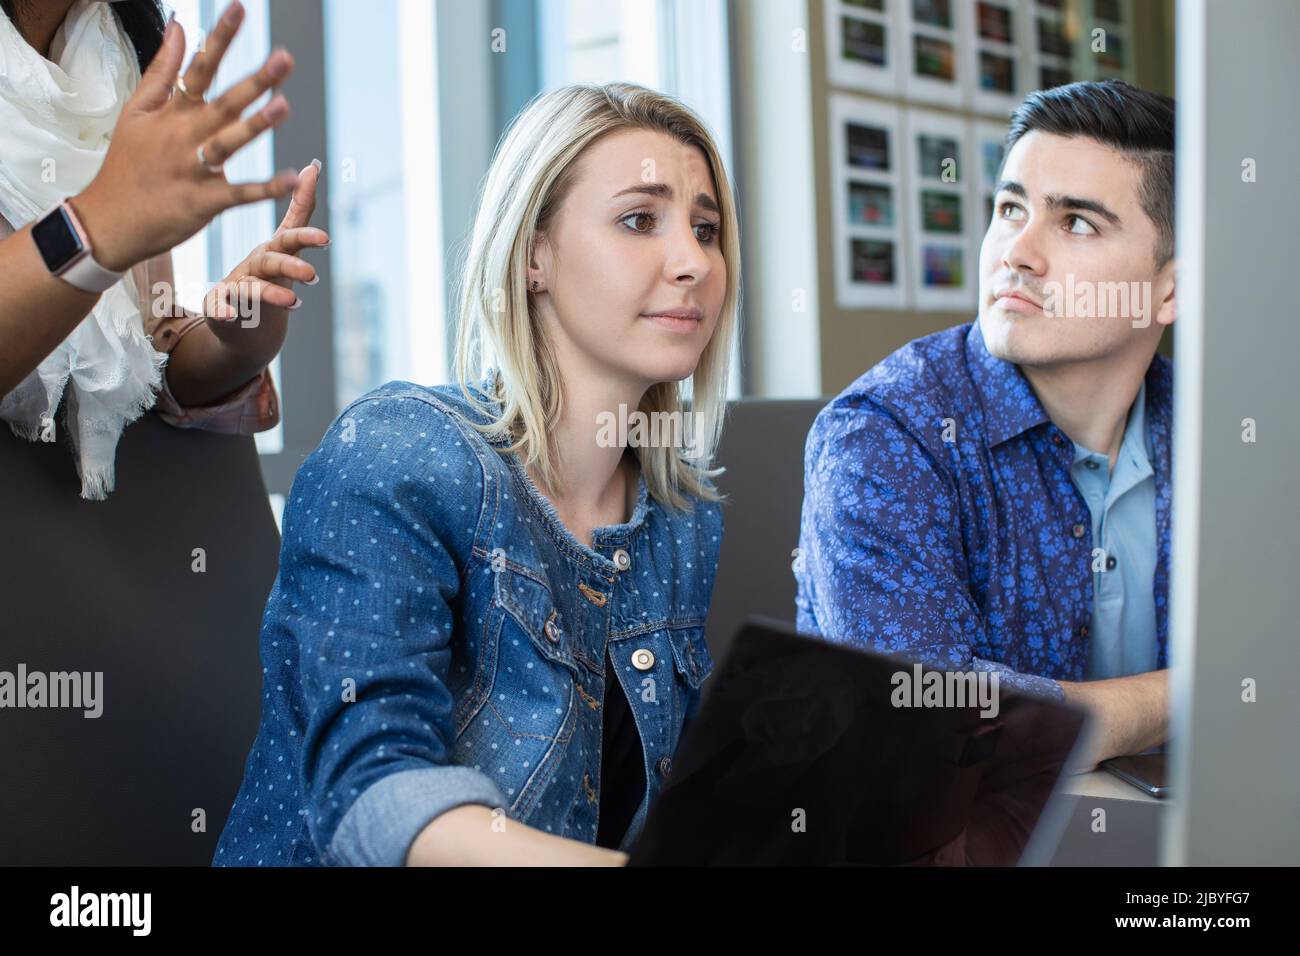 Young woman using computer in office, showing co-workers something on her screen Stock Photo